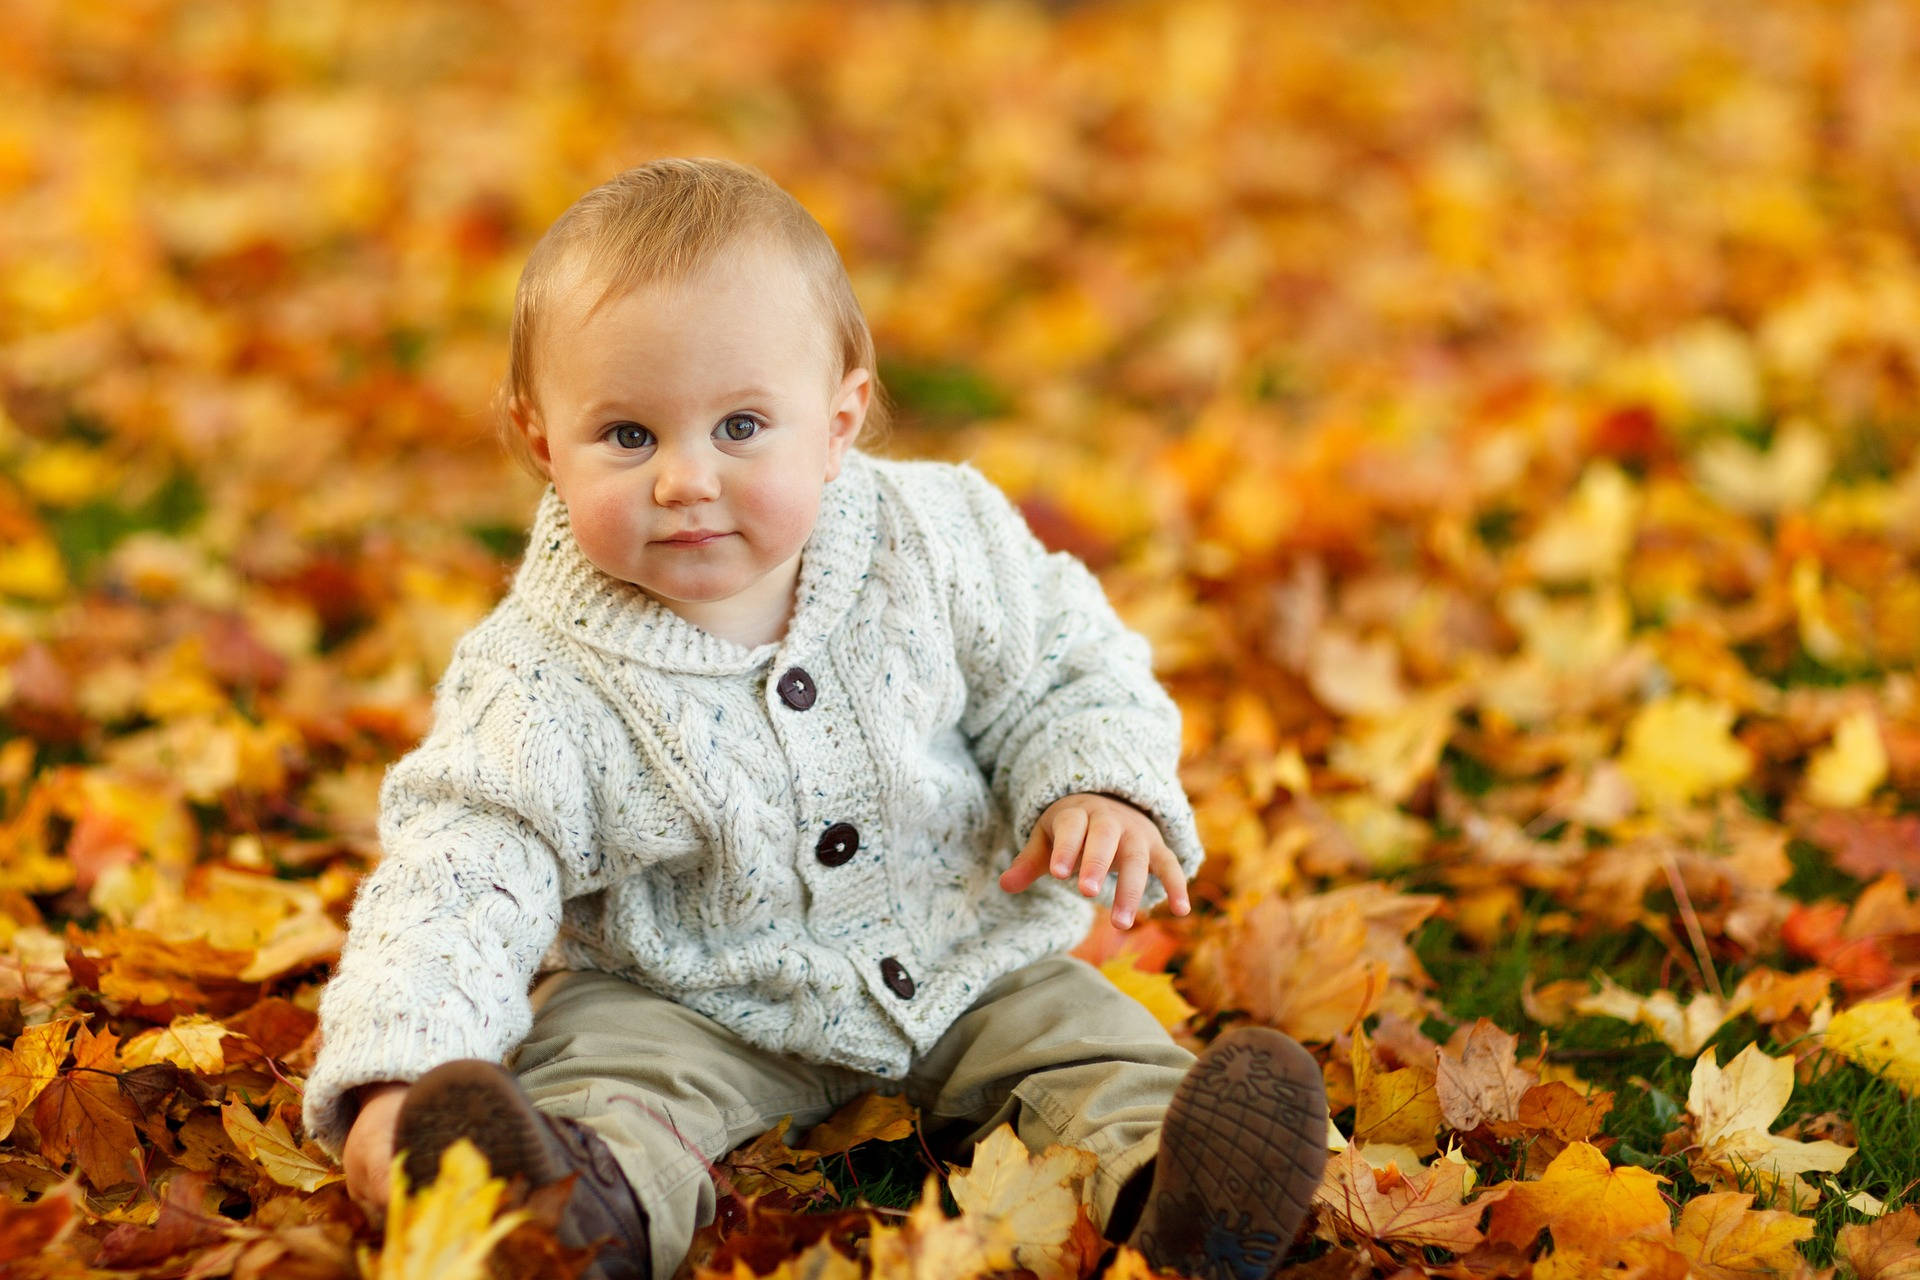 Very Cute Baby With Autumn Leaves Background